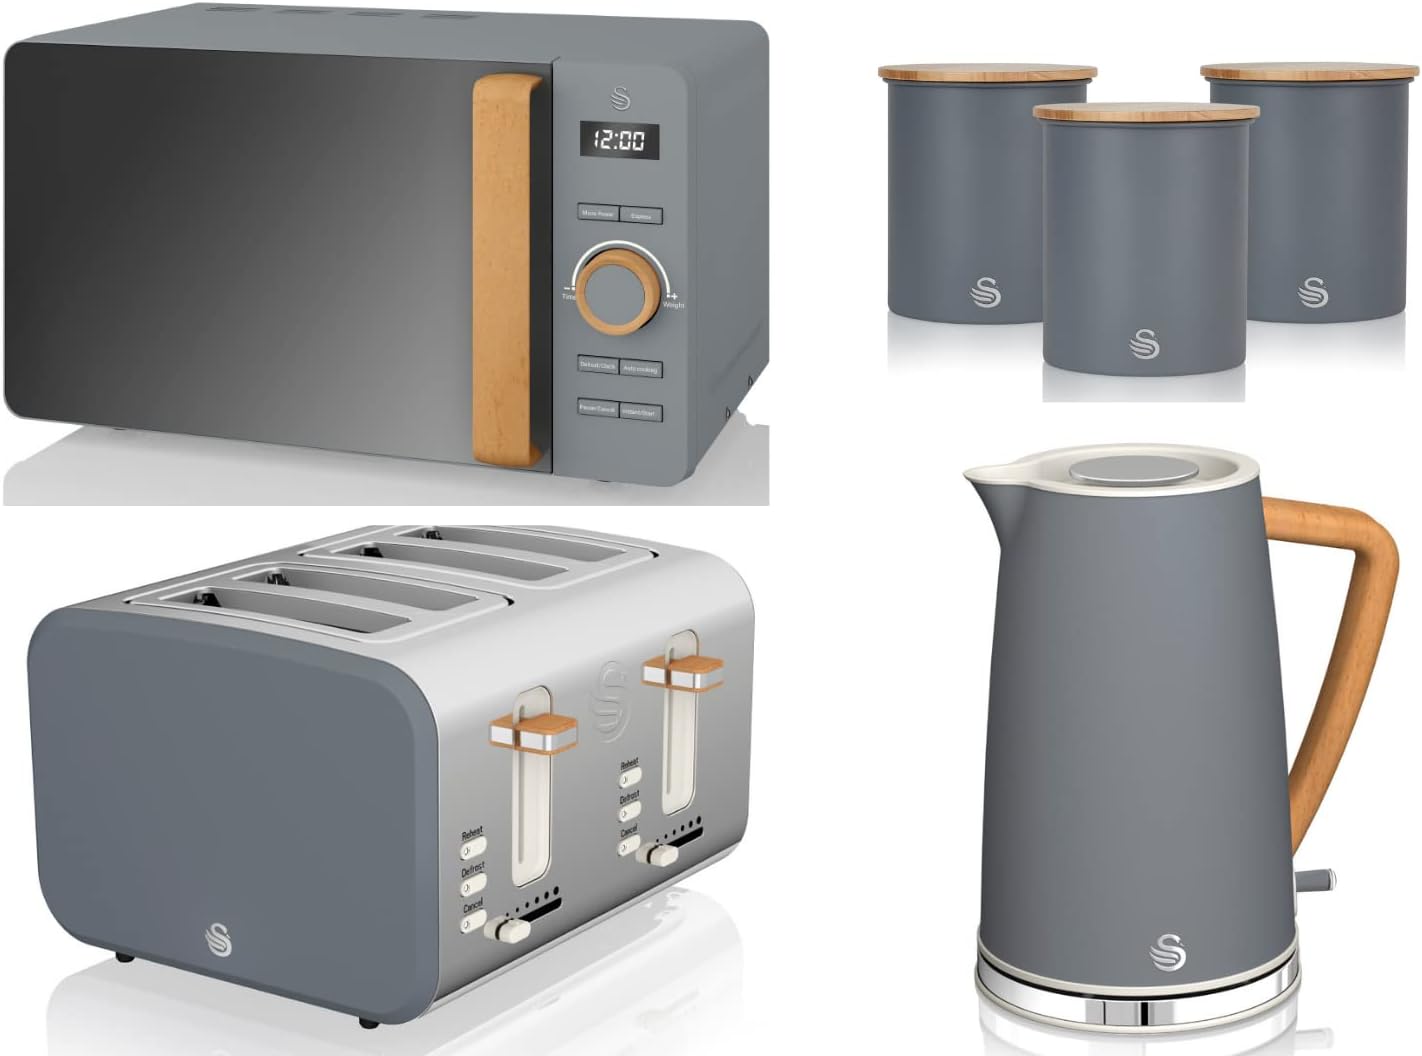 Swan Products Ltd Nordic 6 Piece Kitchen Set in Slate Grey Including 1.7L Jug Kettle, 4 Slice Toaster, 800W 20L Microwave & Tea, Coffee, Sugar Canisters. Scandinavian Style Kitchen Set - Amazing Gadgets Outlet